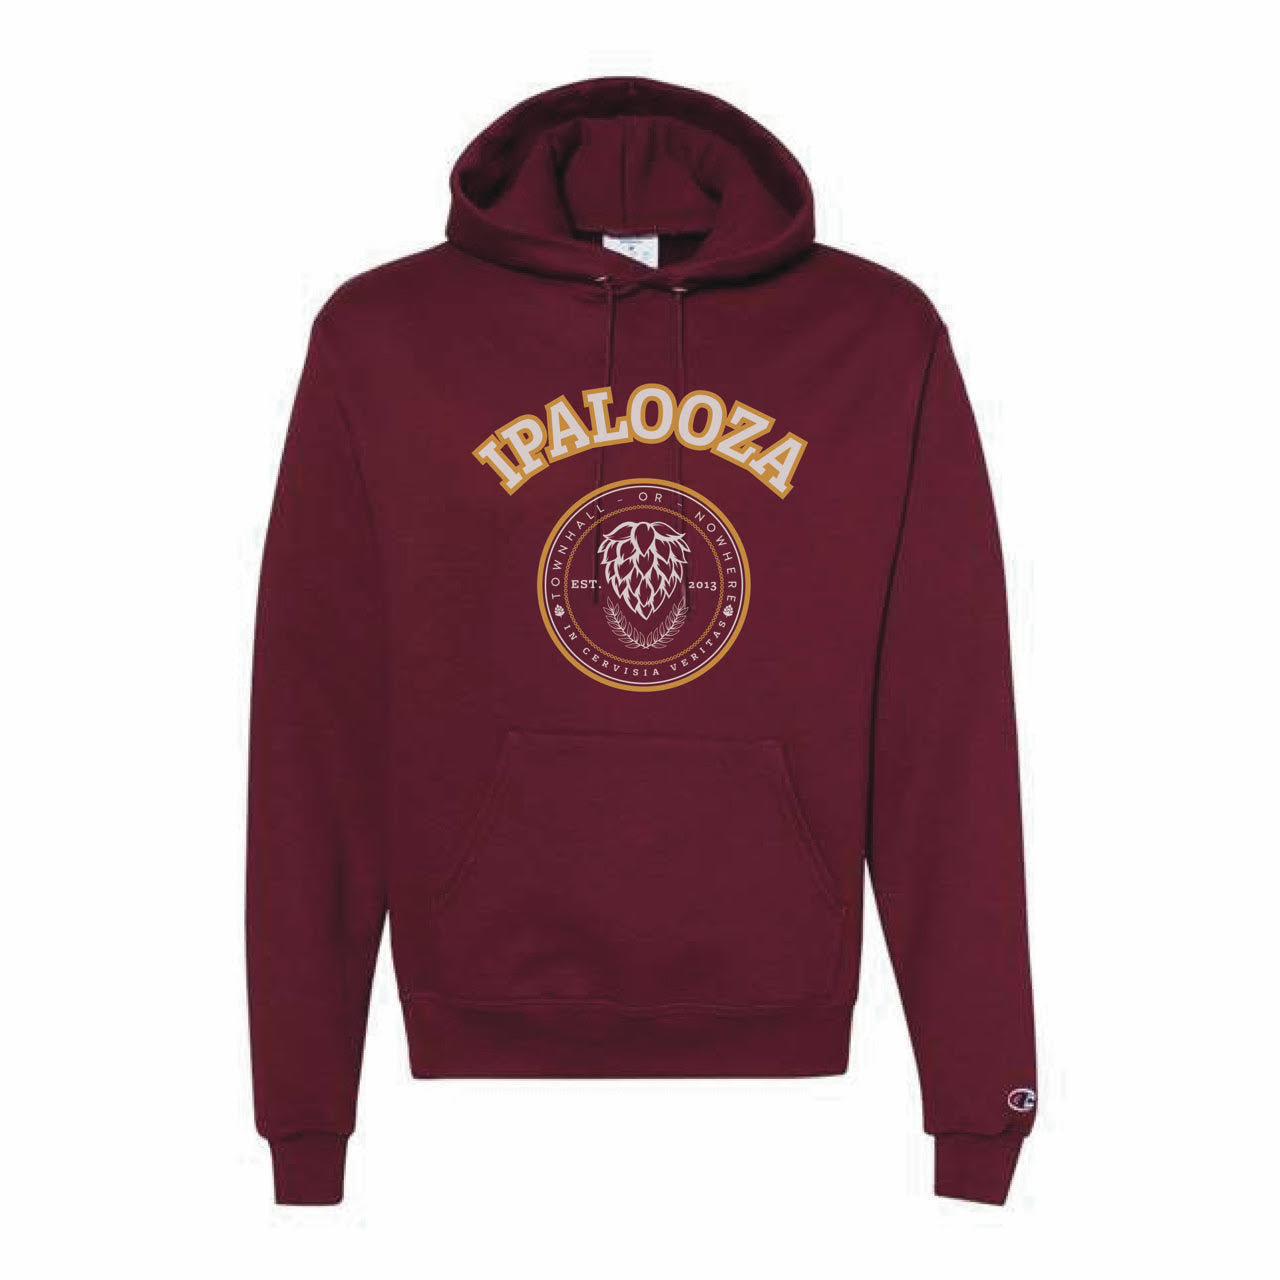 IPALOOZA 2024 Membership $50 - Size Large ONLY (See Your Server for $15 OFF)